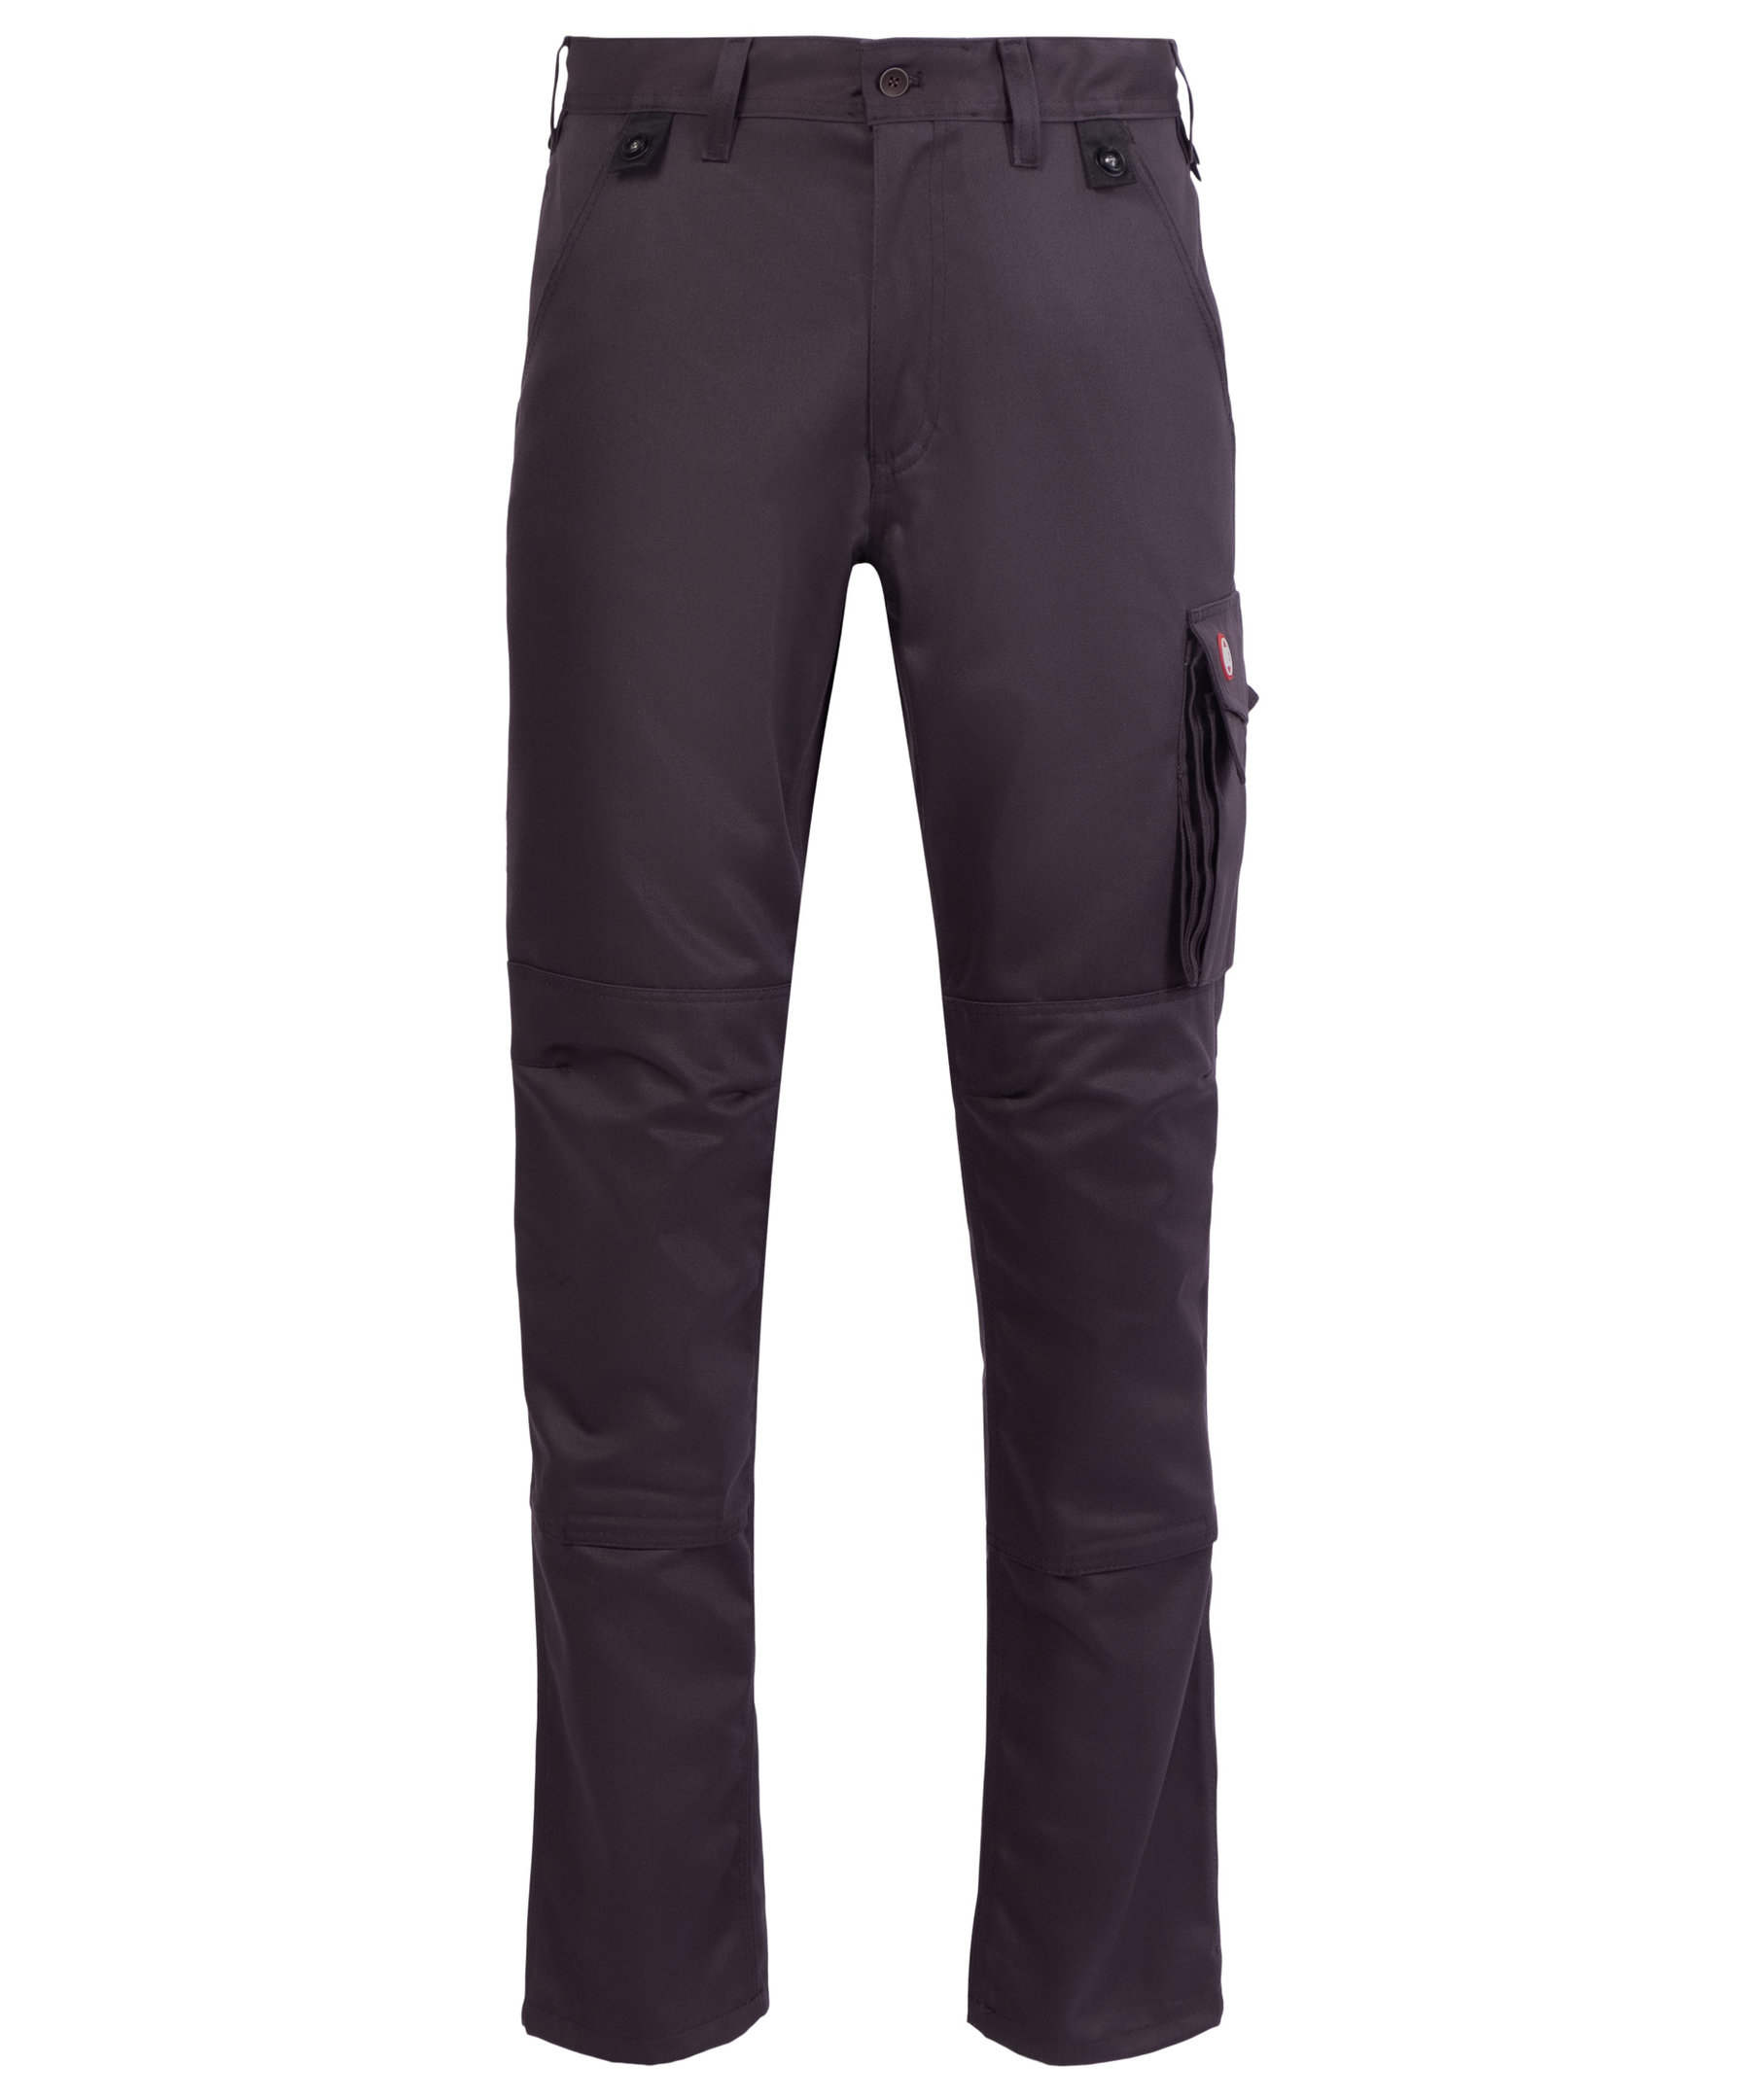 Up To 13 Off MIG Mens Cargo Work Trousers  Groupon